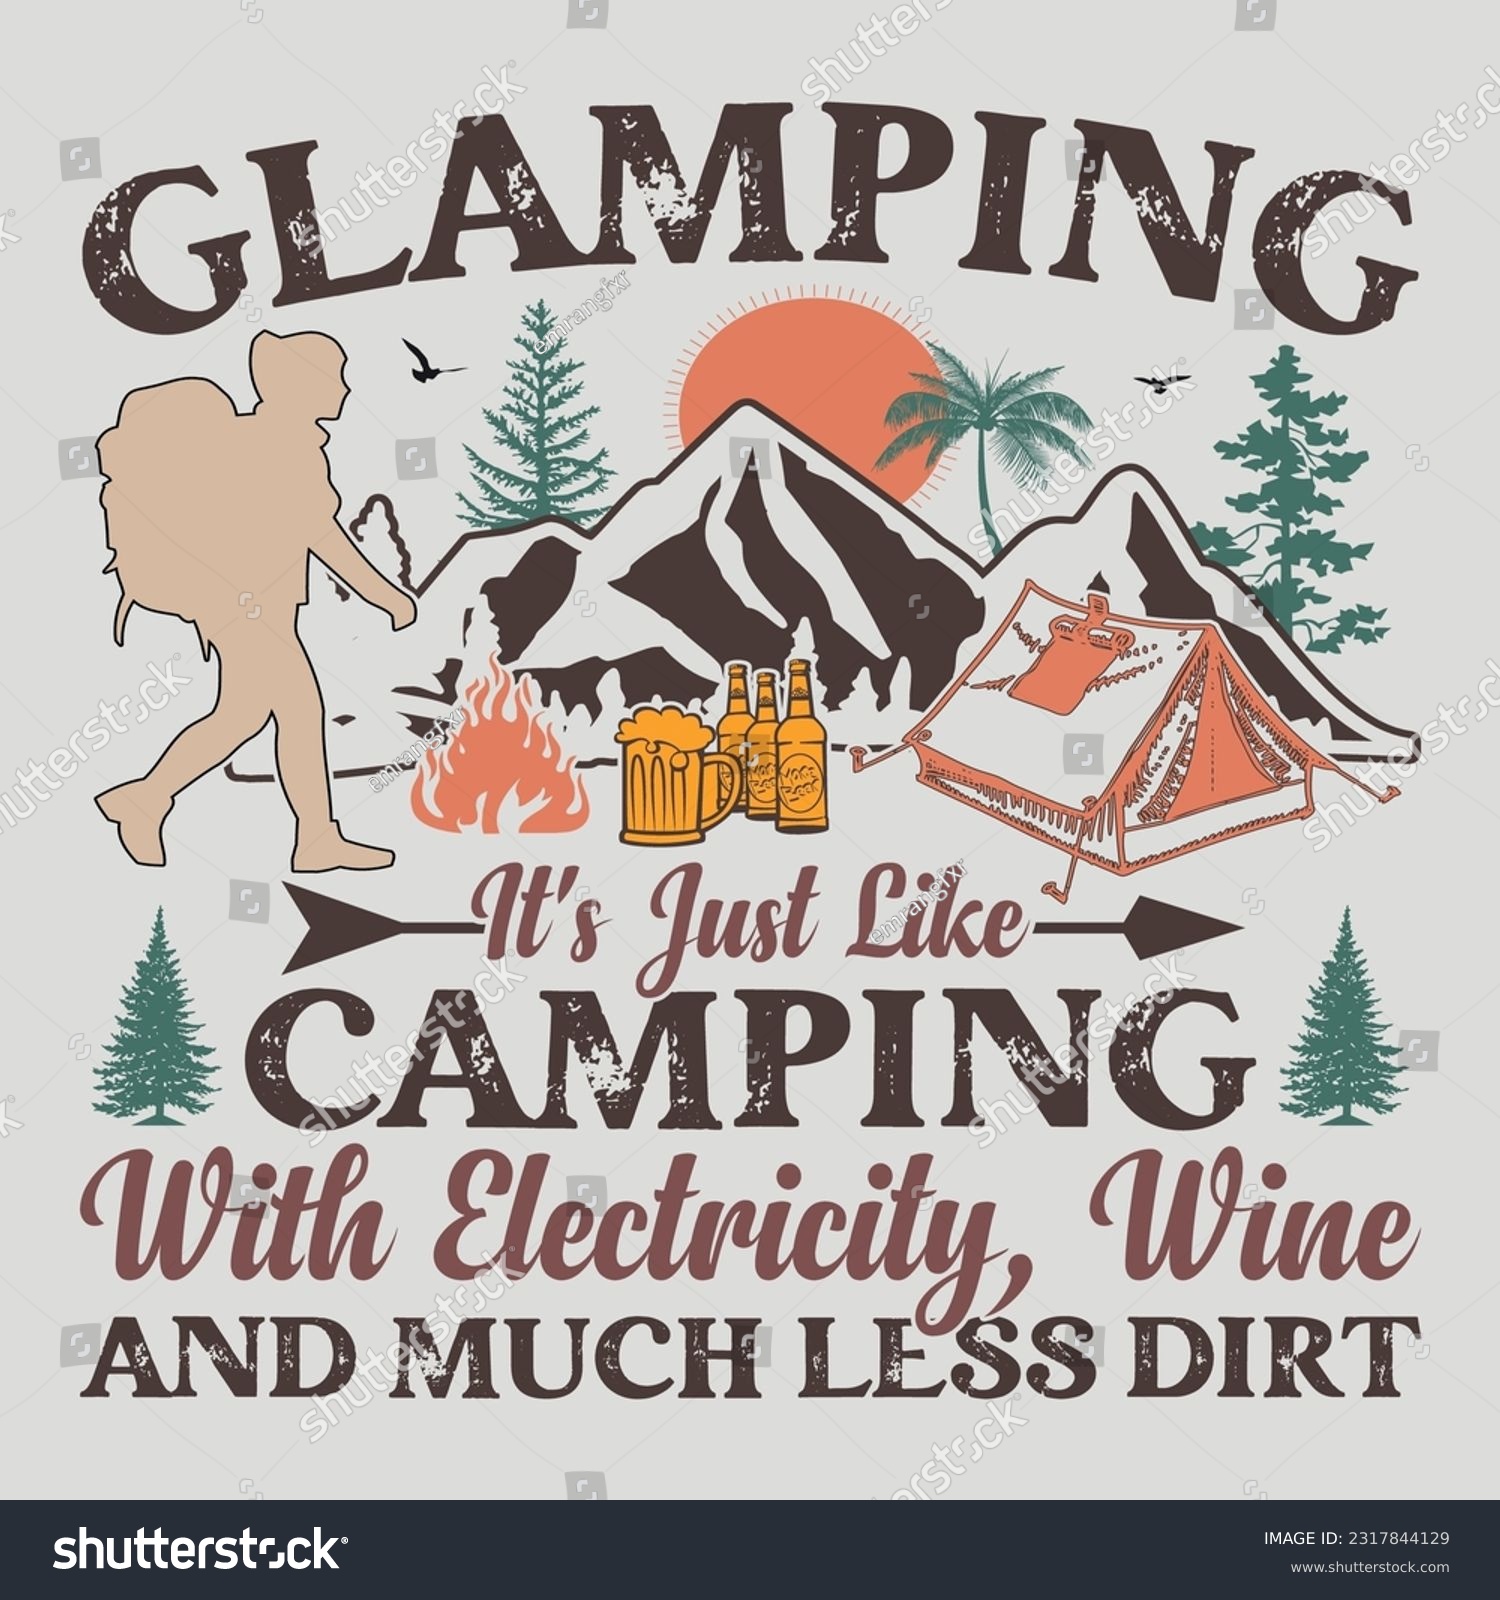 SVG of Glamping It's Just Like Camping With Electricity, Wine And Much Less Dirt Camping SVG Sublimation Vector Graphic T-Shirt Design svg